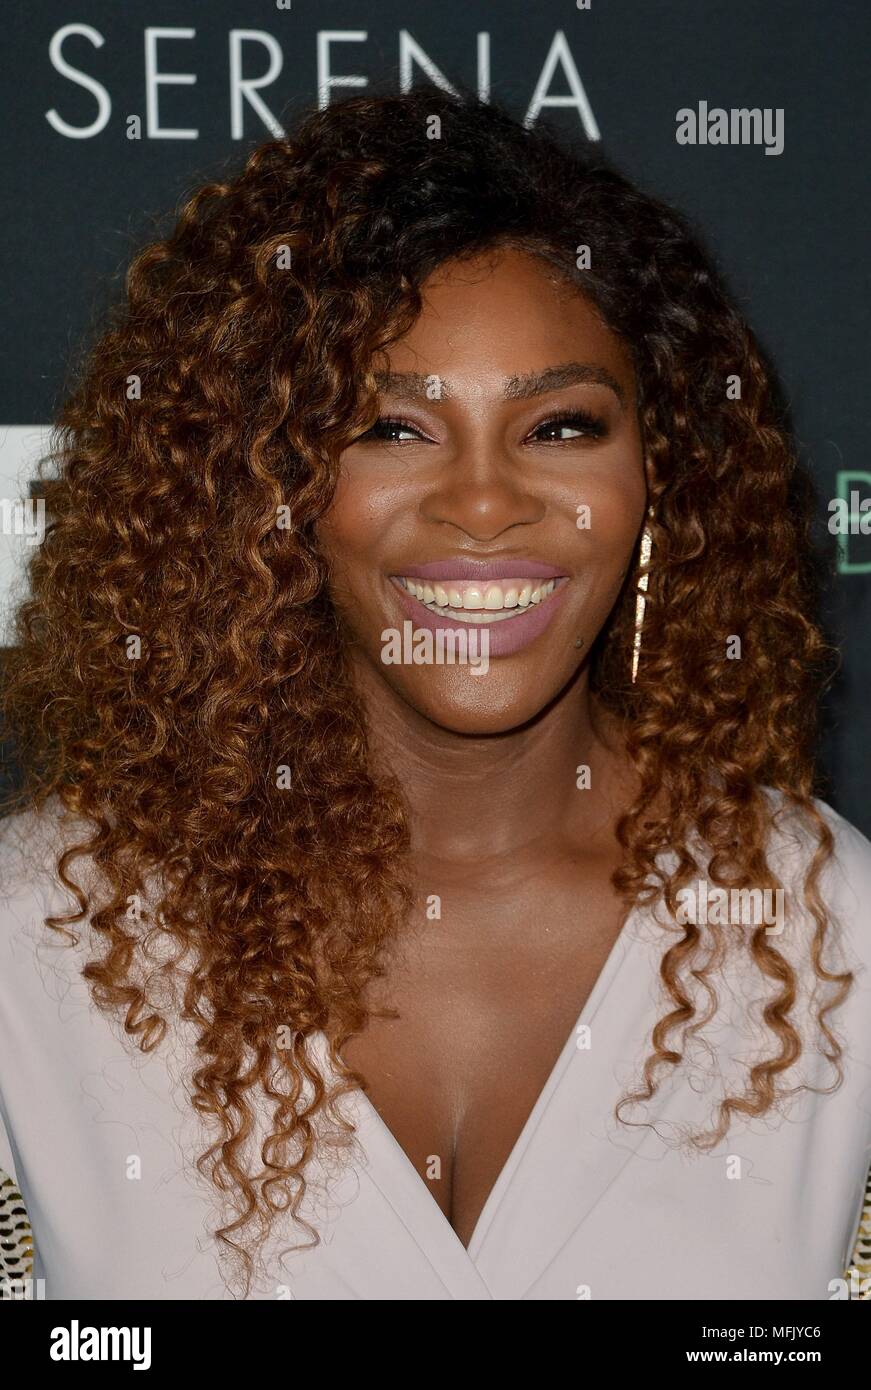 New, NY, USA. 25th Apr, 2018. Serena Williams at arrivals for BEING SERENA  Premiere, Time Warner Center, New, NY April 25, 2018. Credit: Kristin  Callahan/Everett Collection/Alamy Live News Stock Photo - Alamy